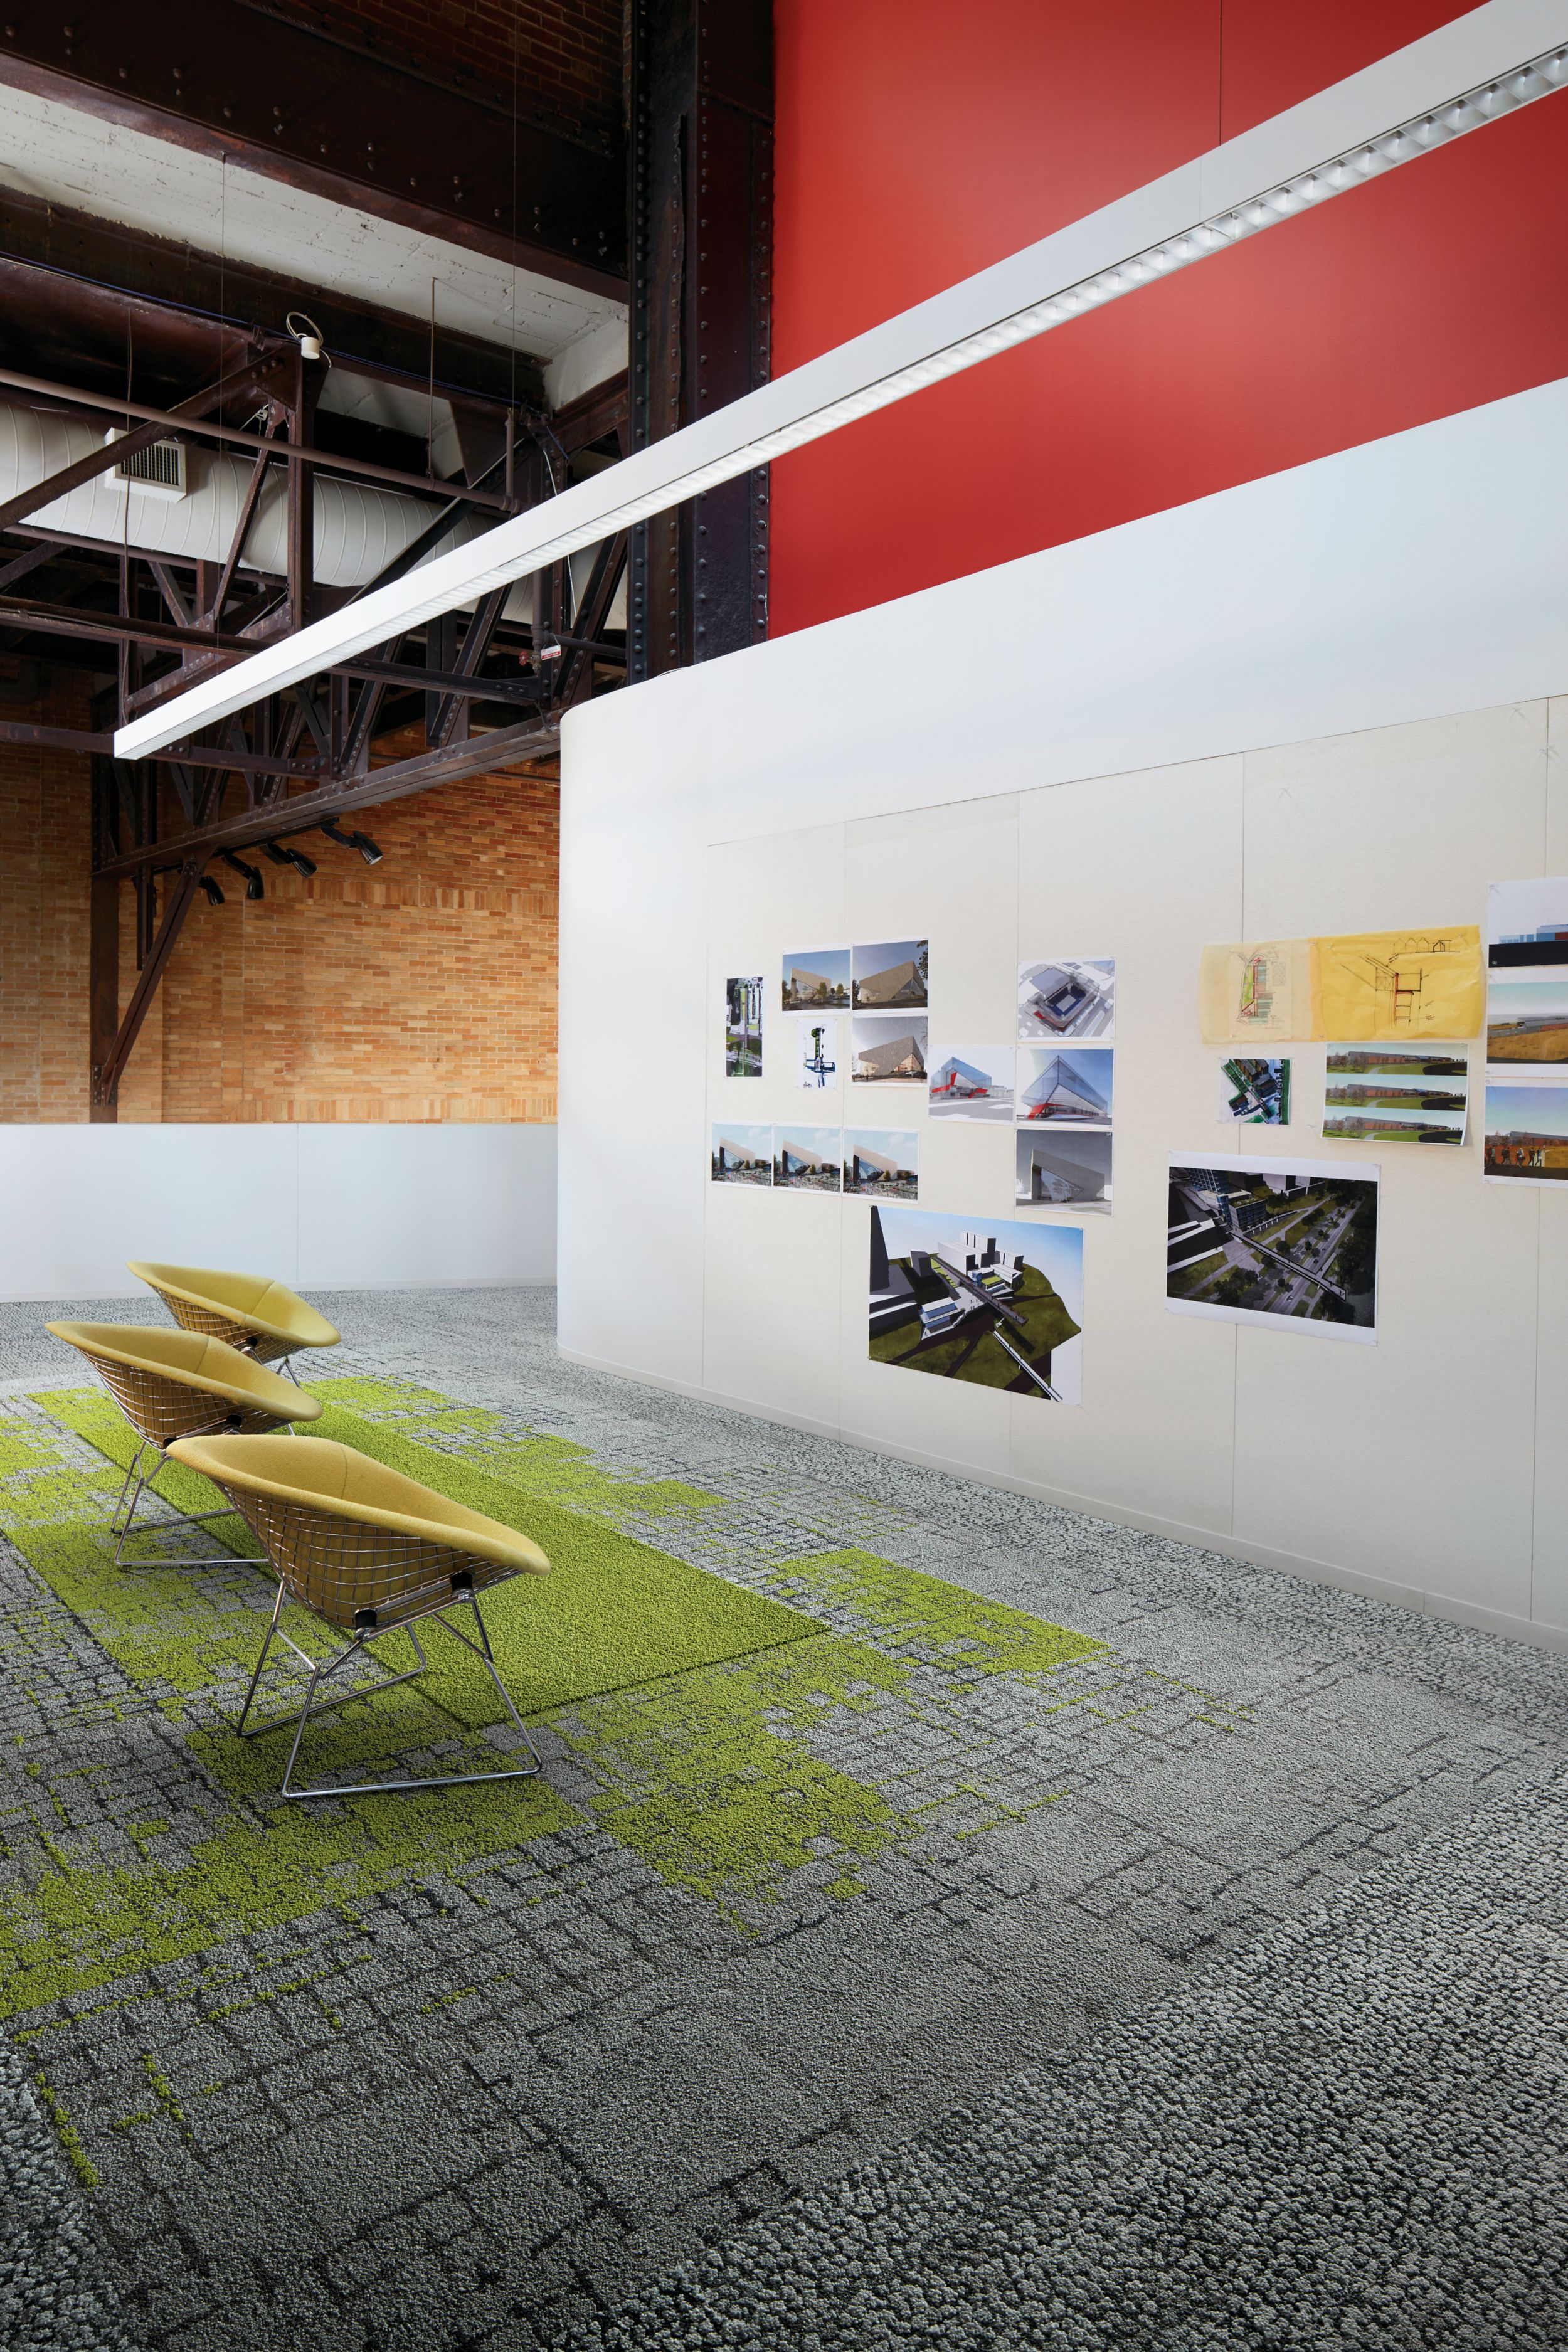 Interface Kerbstone, Moss in Stone, and Moss carpet tile with HN830 and HN840 plank carpet tile in seating area with three chairs facing wall with pictures numéro d’image 5